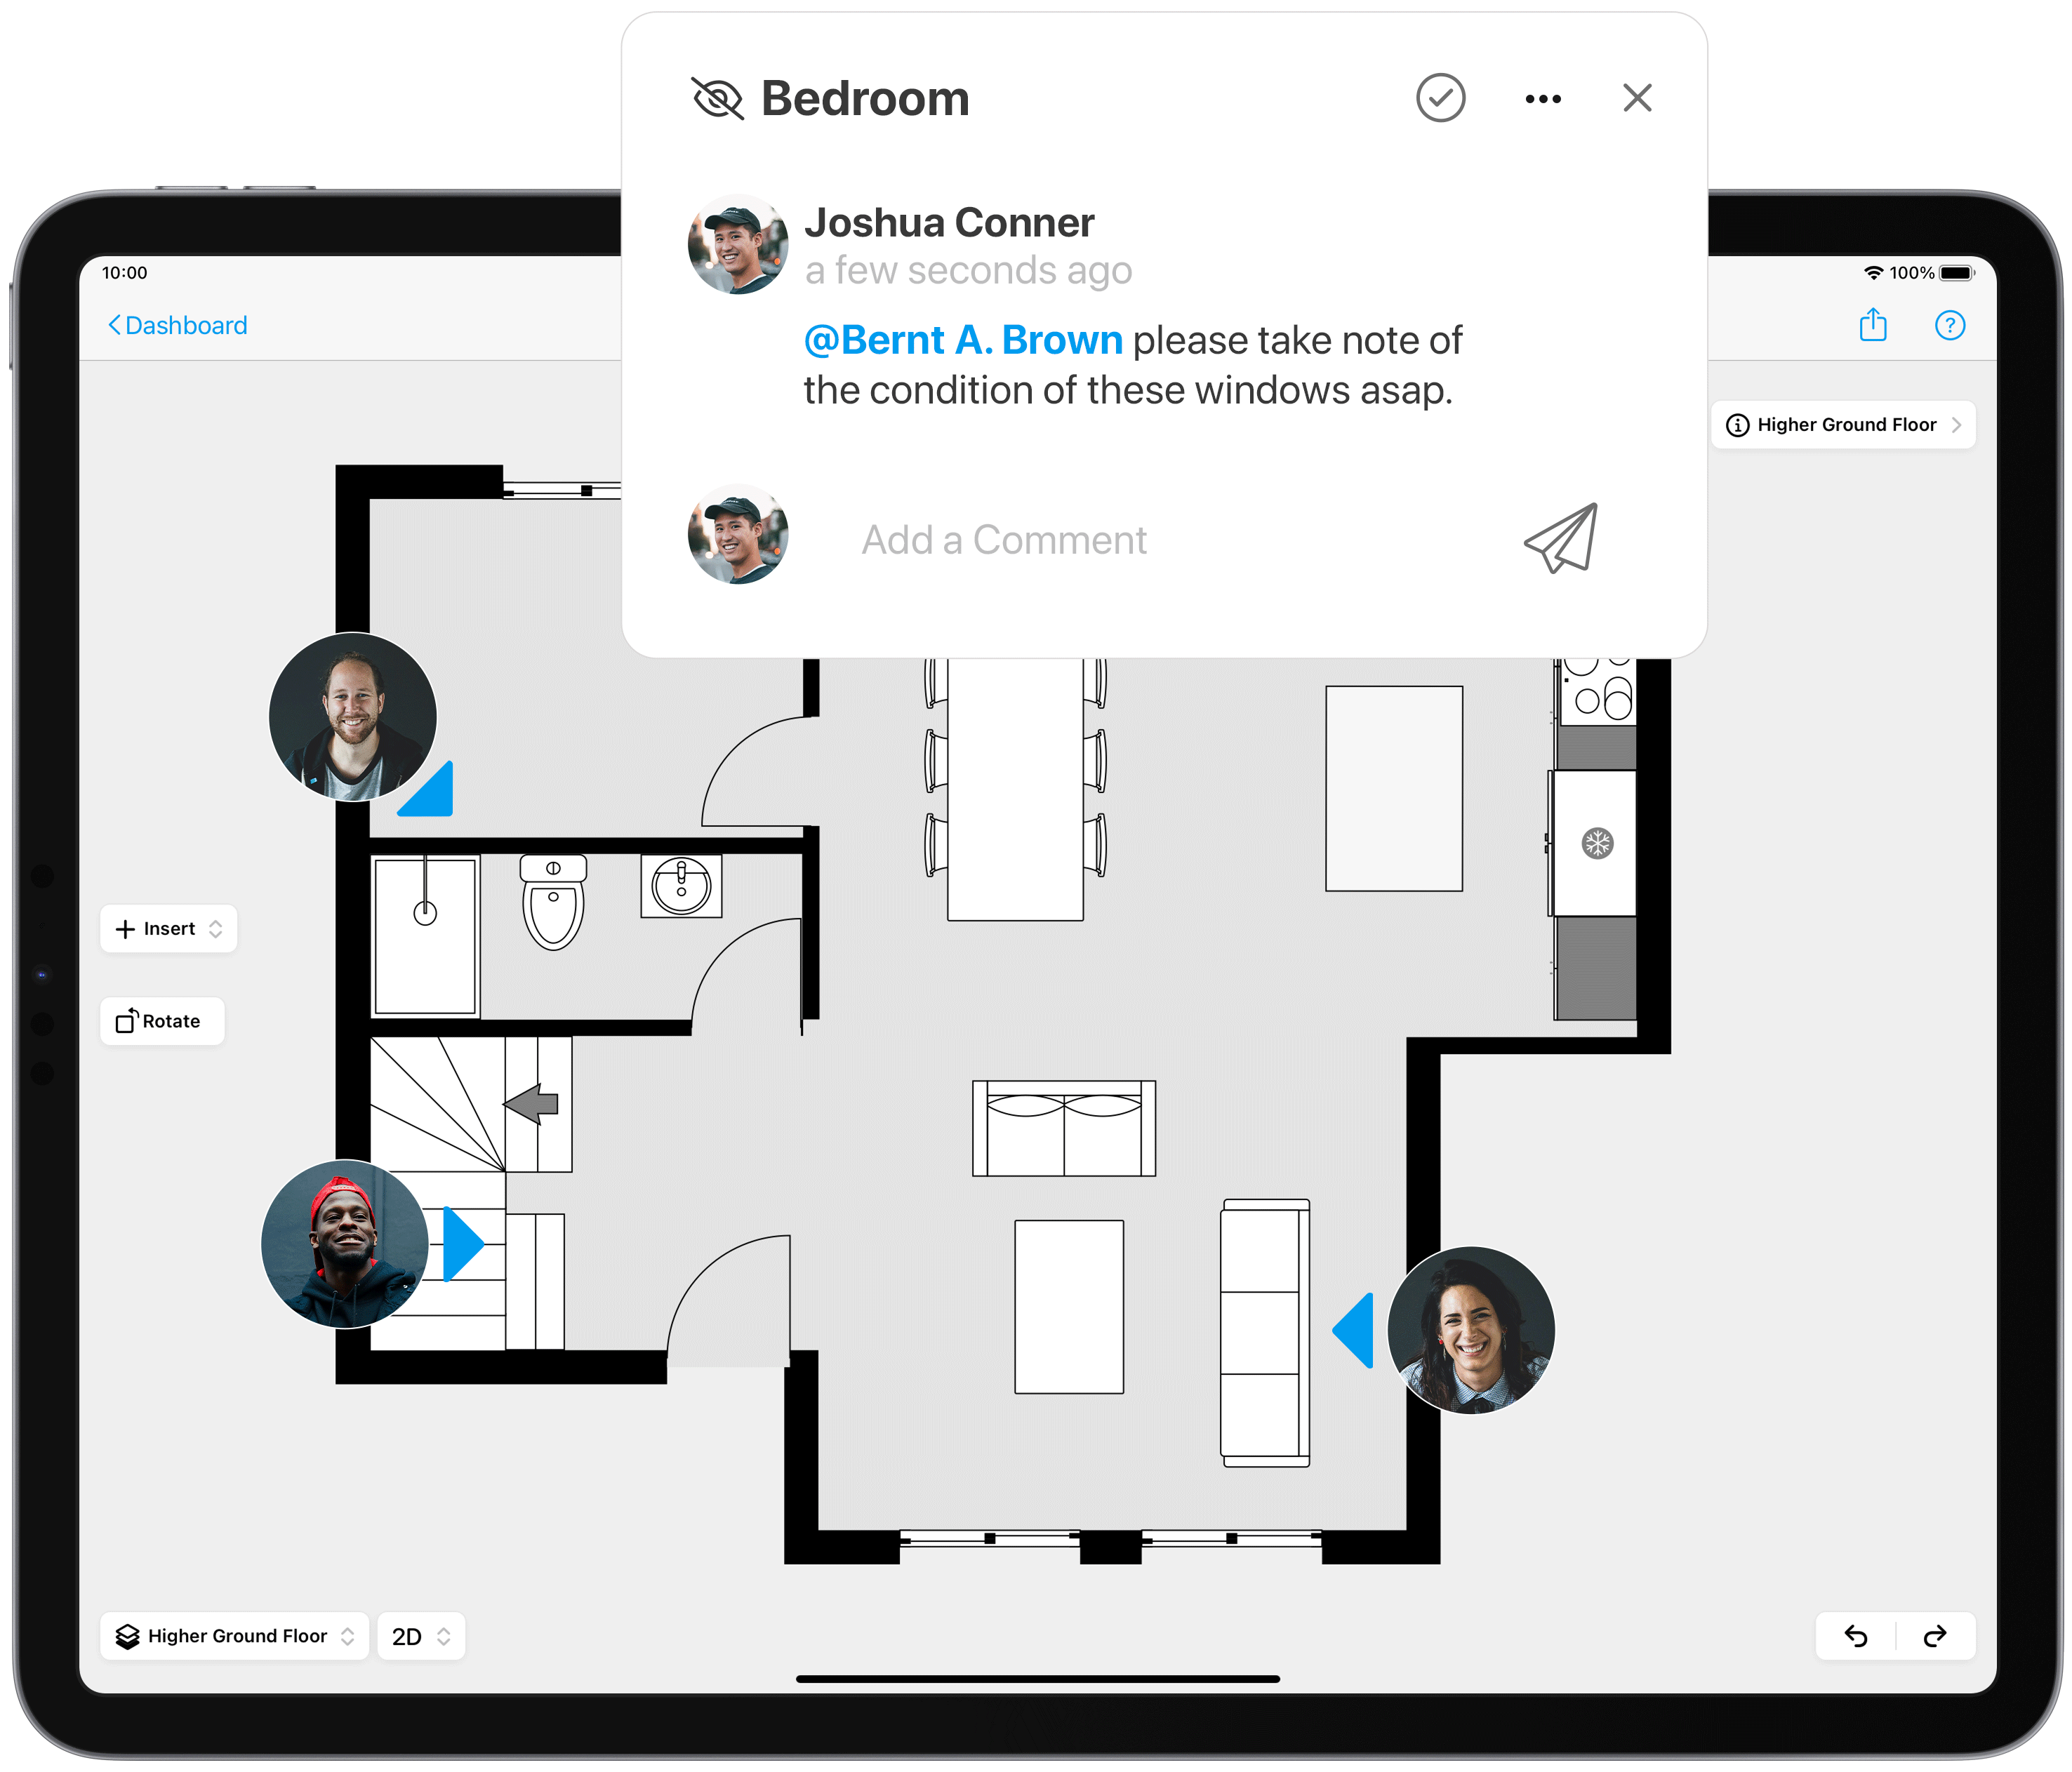 Restoration company employees communicating through the commenting features of the magicplan app on a 2D floor plan on an ipad about the condition of a window.